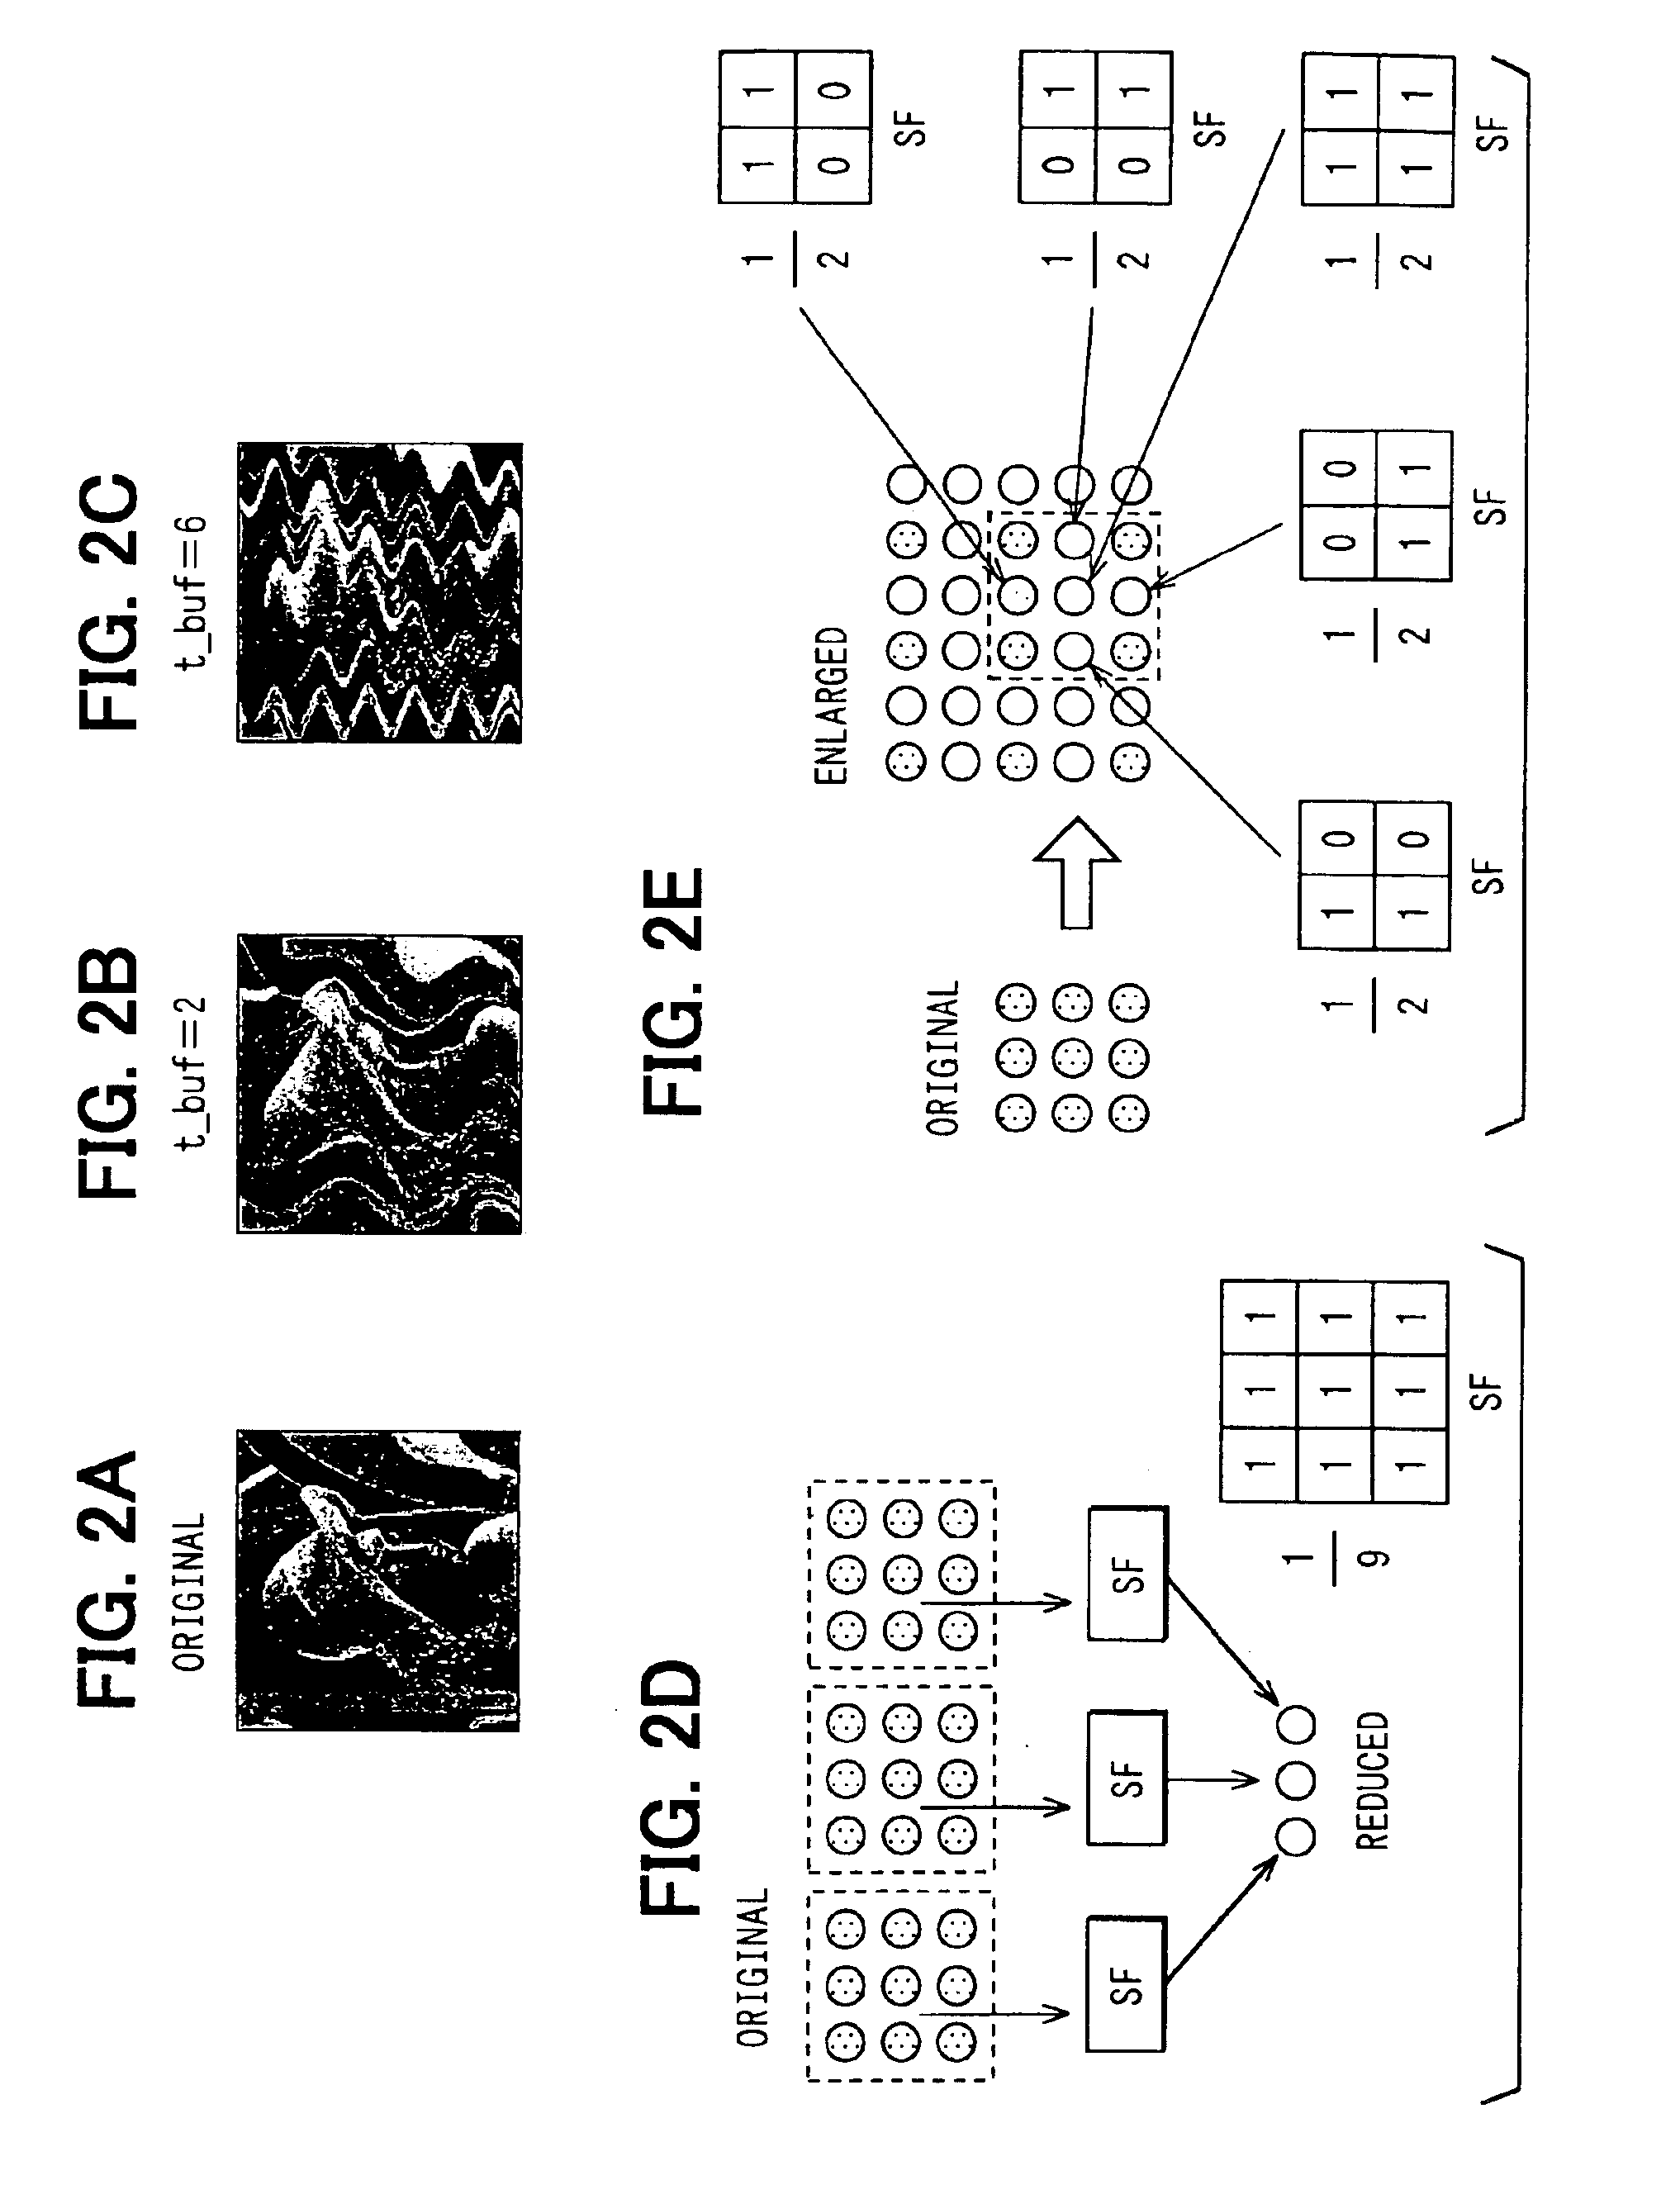 Image processing apparatus having processing operation by coordinate calculation